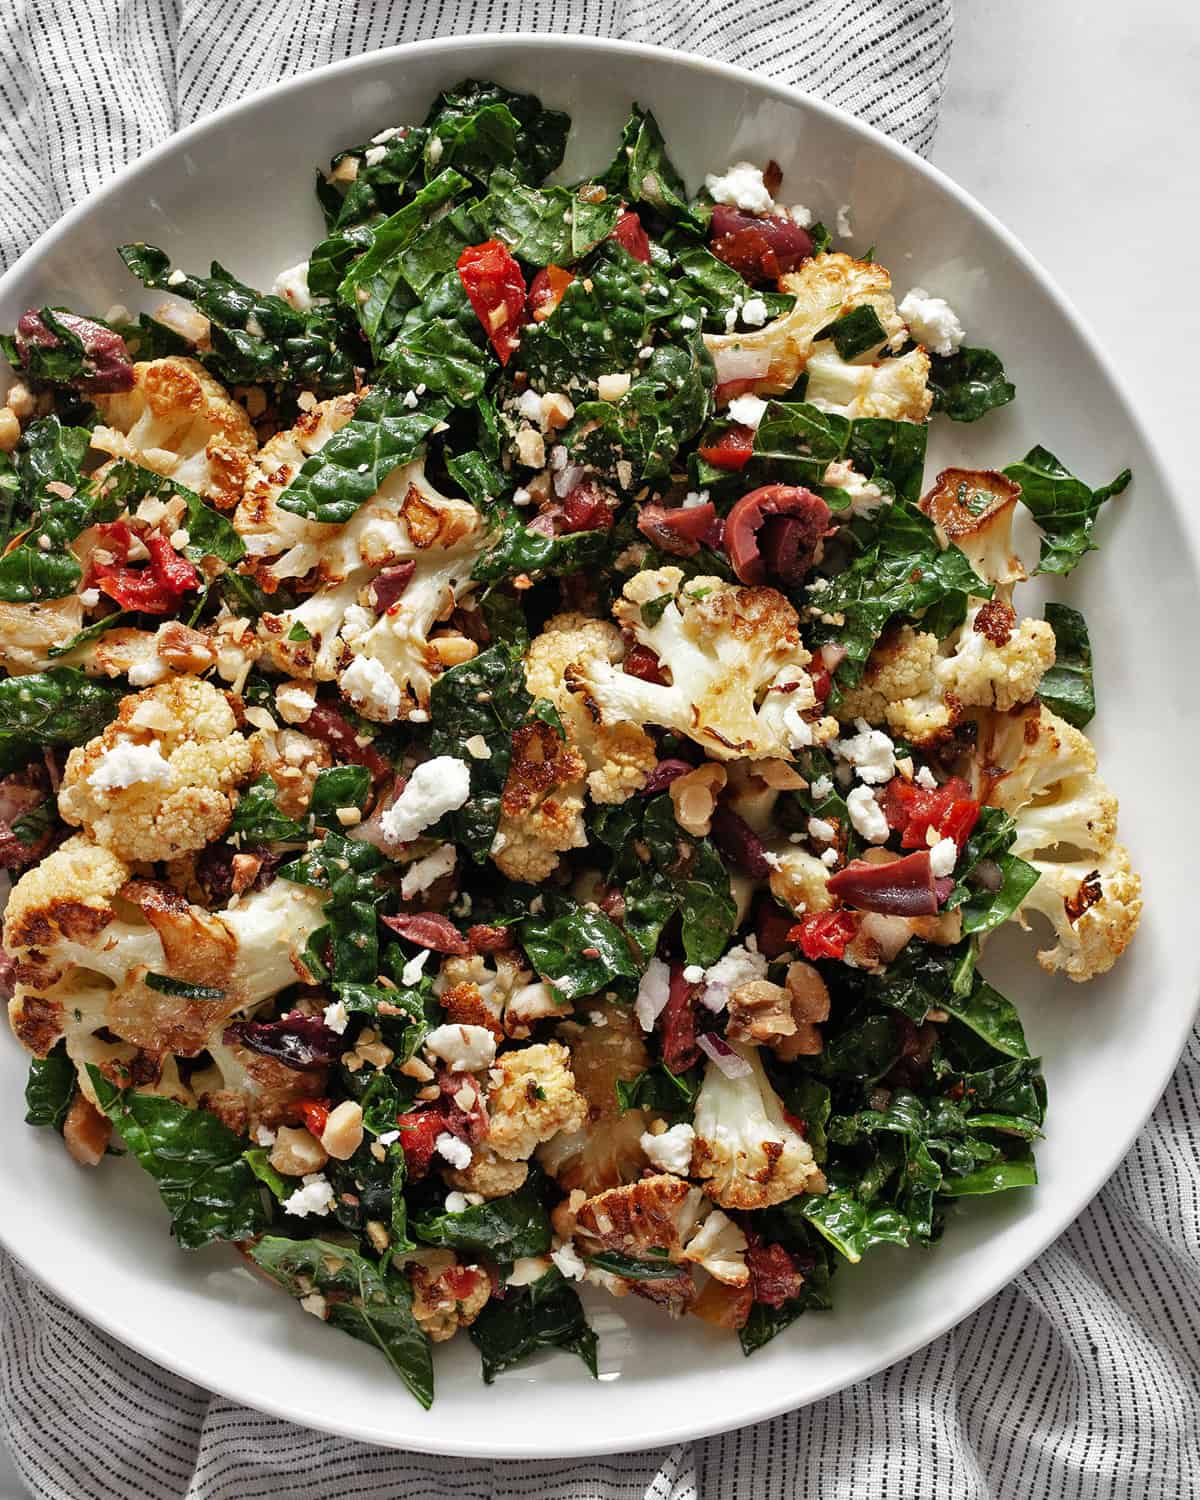 Roasted cauliflower kale salad with tomatoes and olives on a plate.